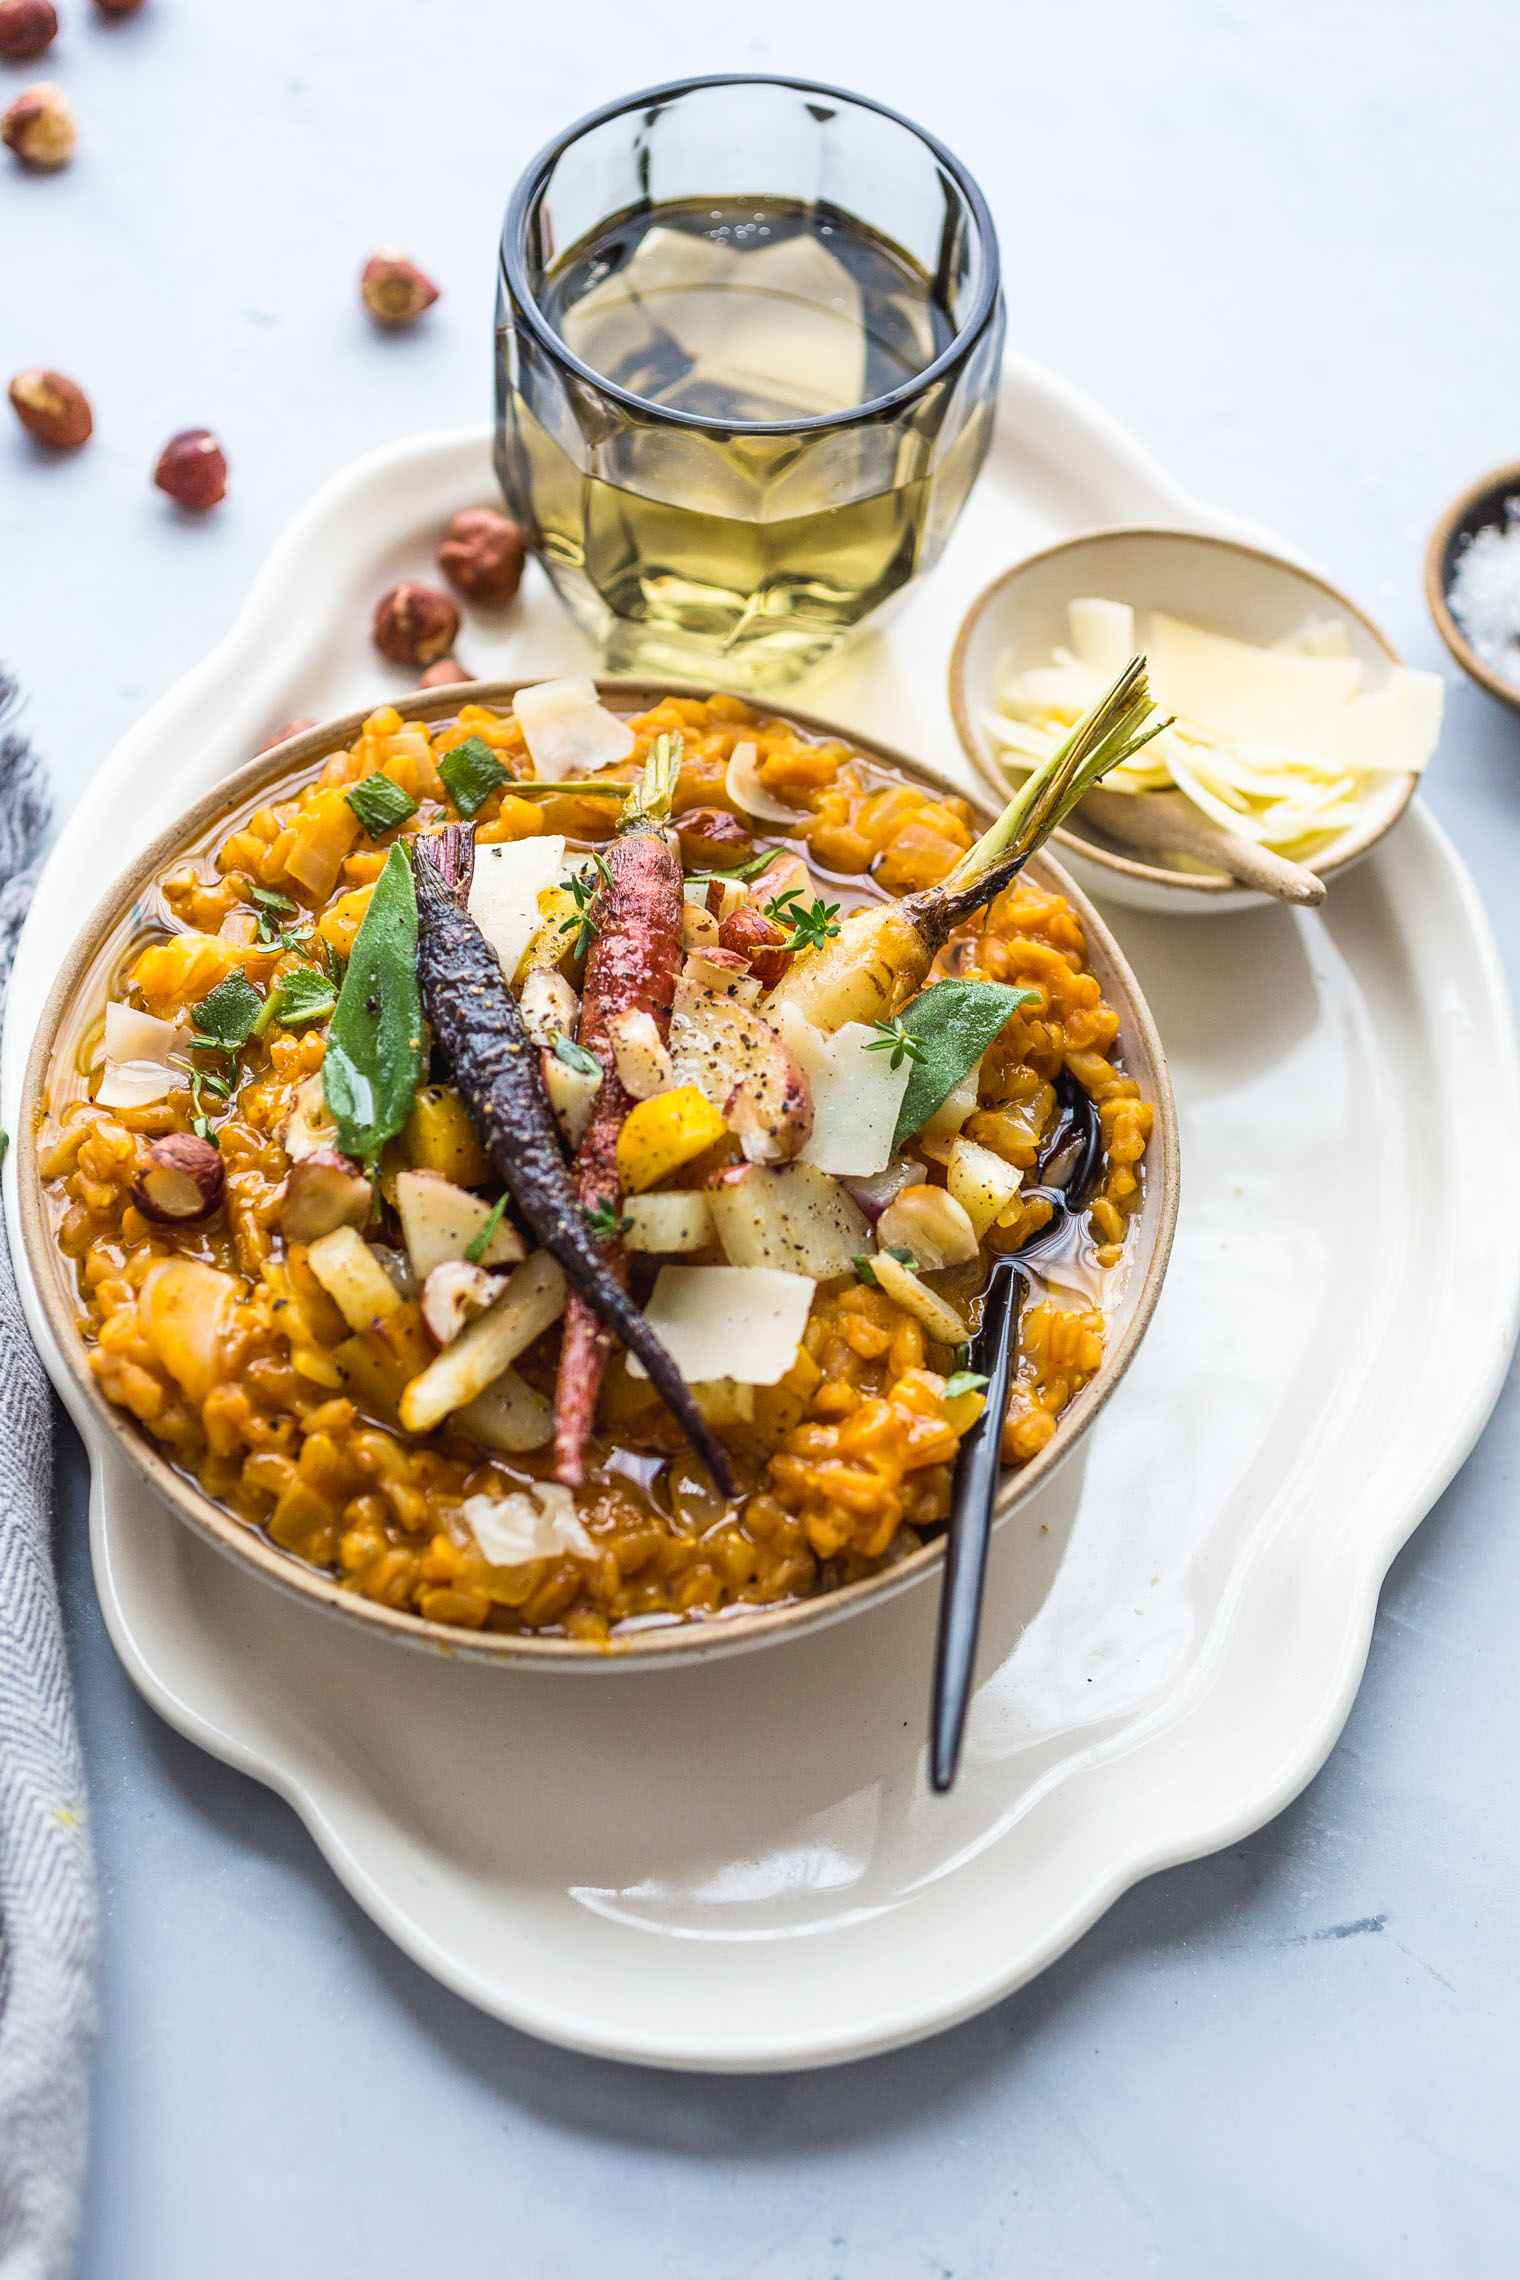 Pumpkin Farro Risotto with Roasted Winter Vegetables